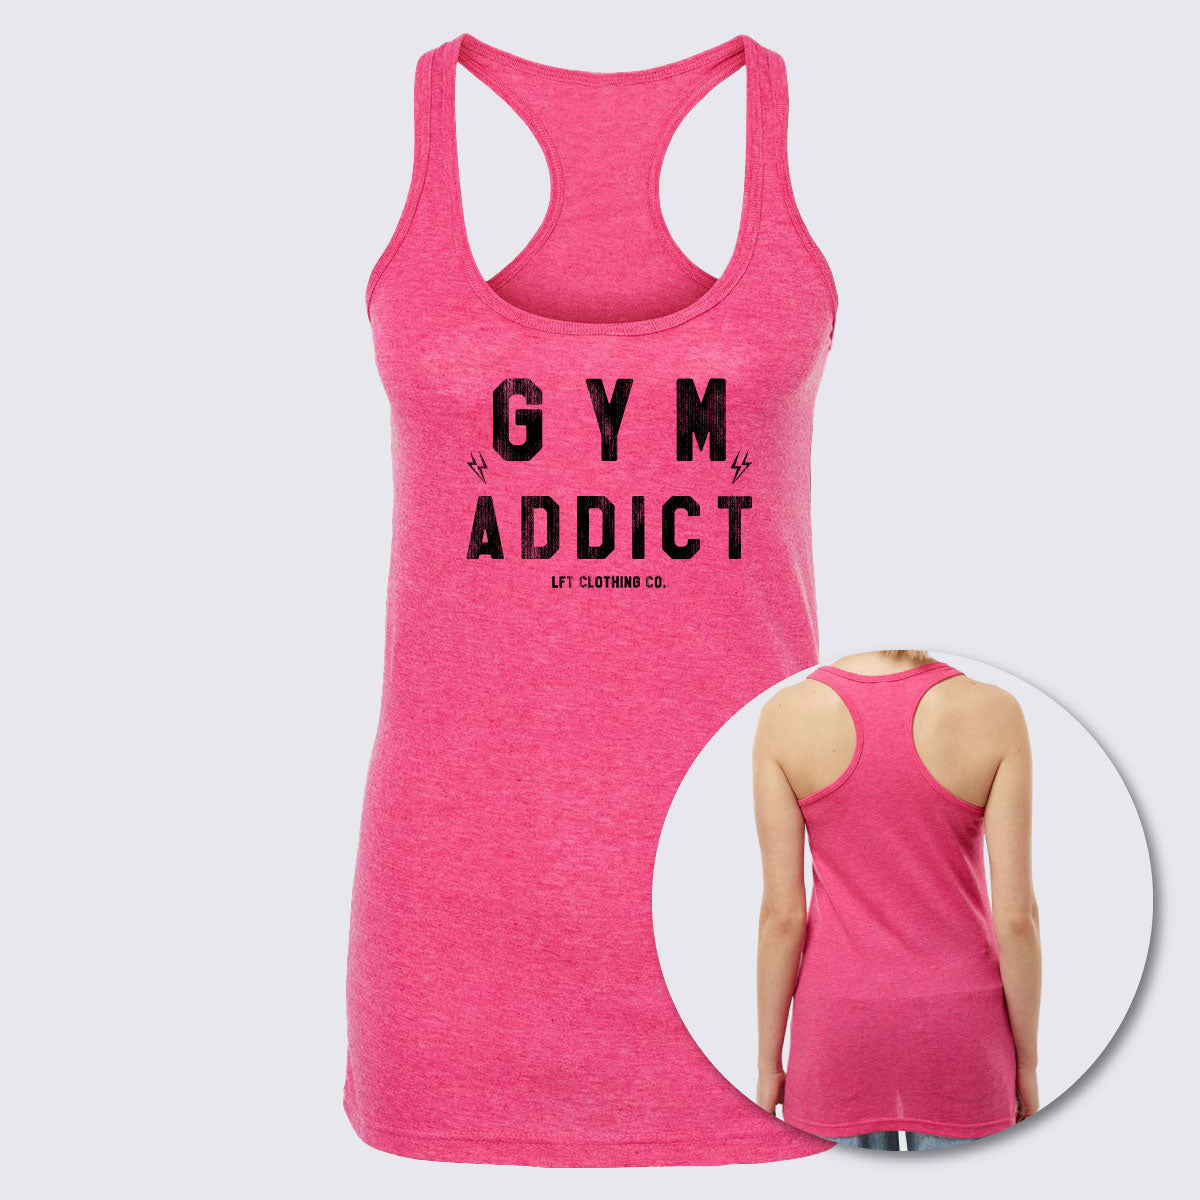 Addicted Funny Graphic Womens Tank Top, Hot Pink, Medium